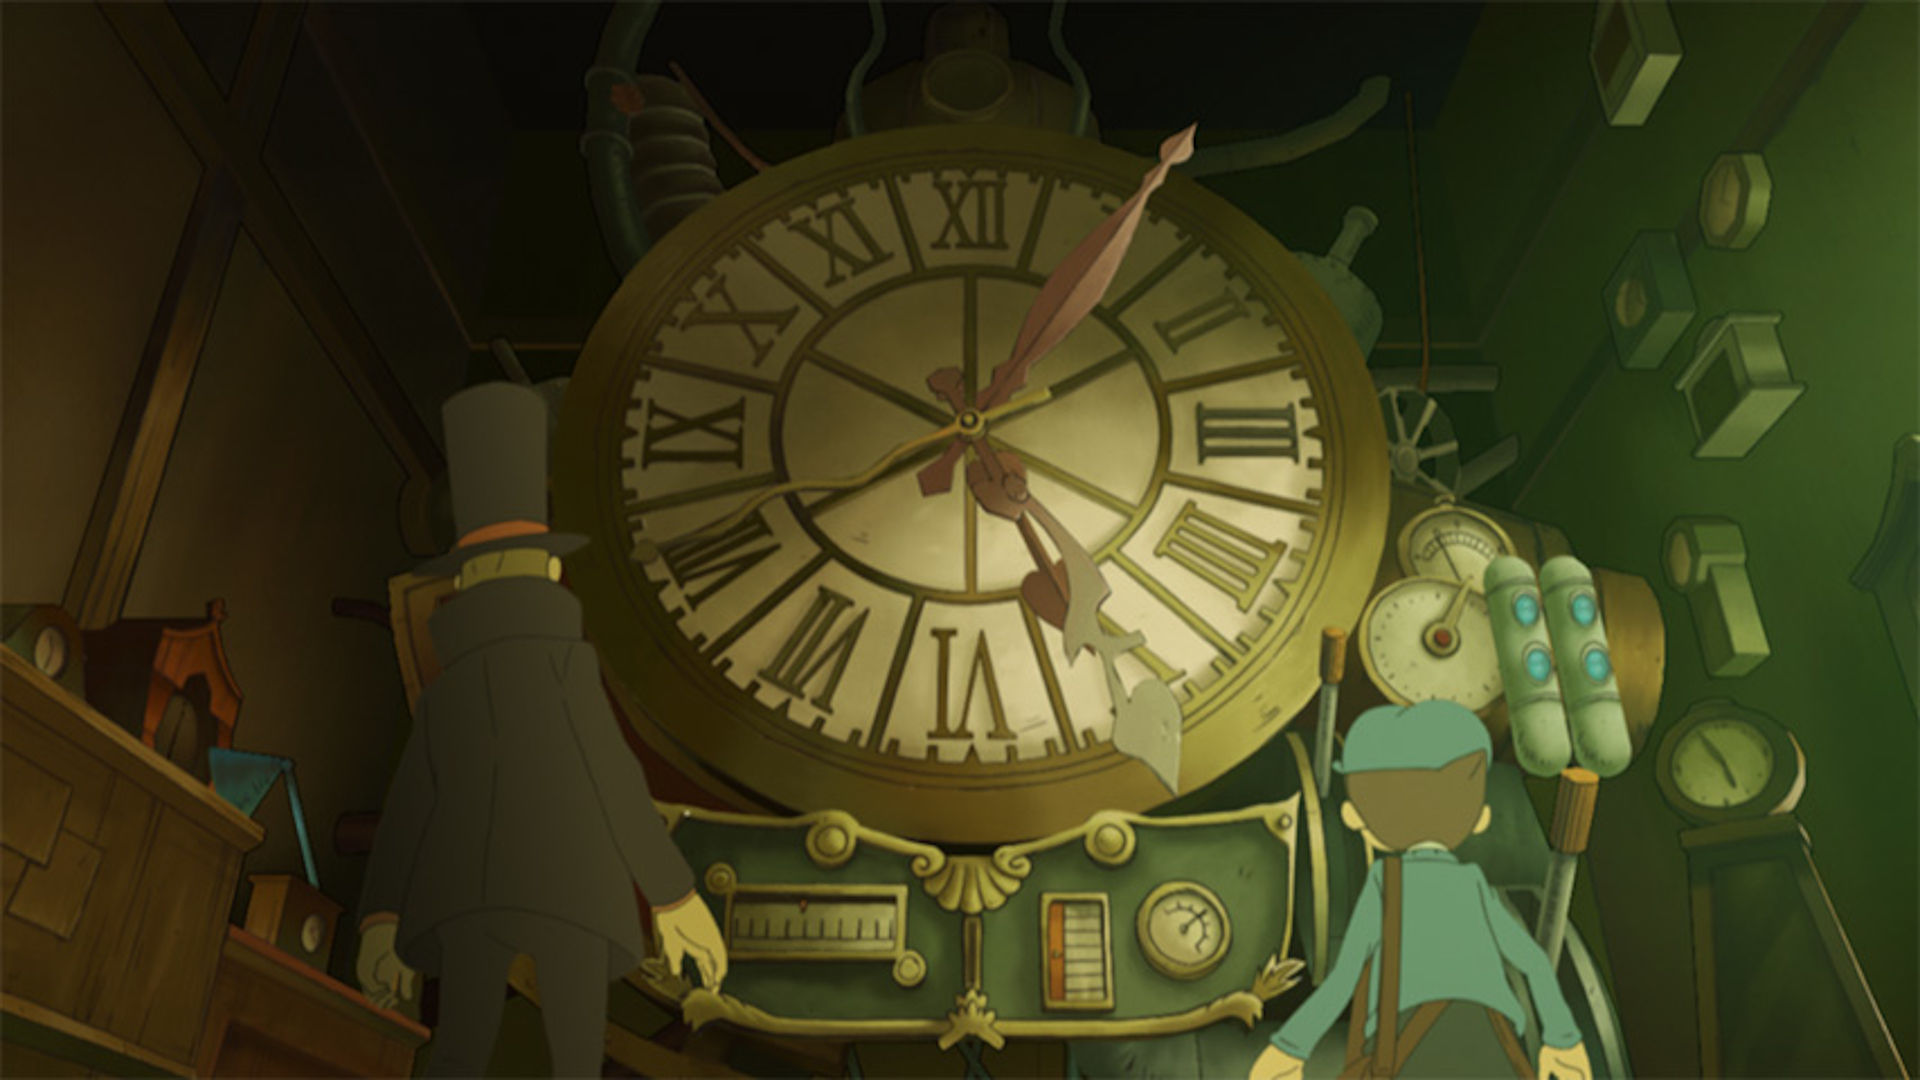 Layton and Luke stand in front of a large clock in this screenshot from "Professor Layton and the Unwound Future," 2008 (Image from Level-5/Nintendo).